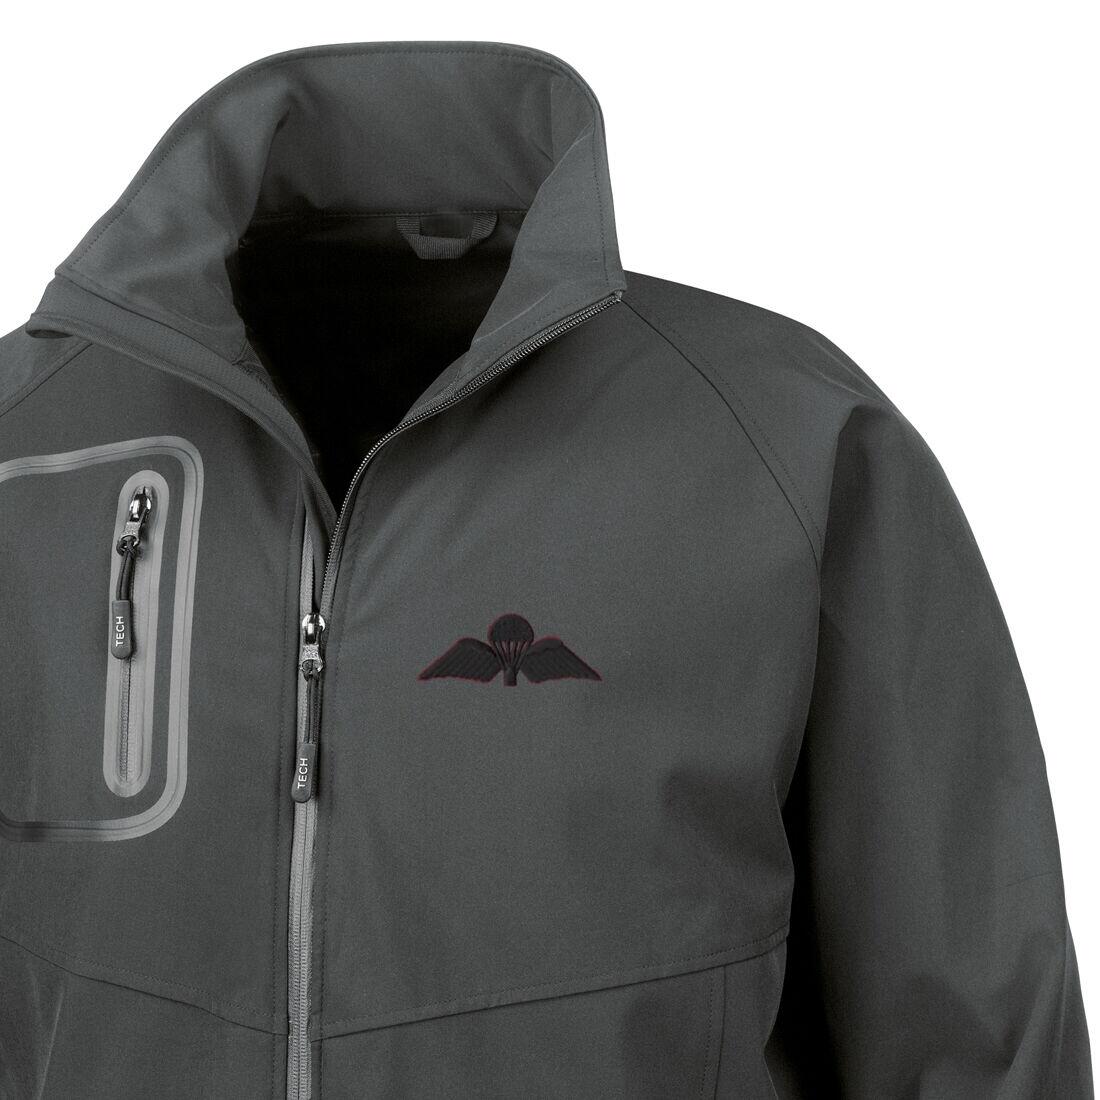 *CLEARANCE* Softshell Jacket, XL, Black, Jump Wings (Black Subdued)